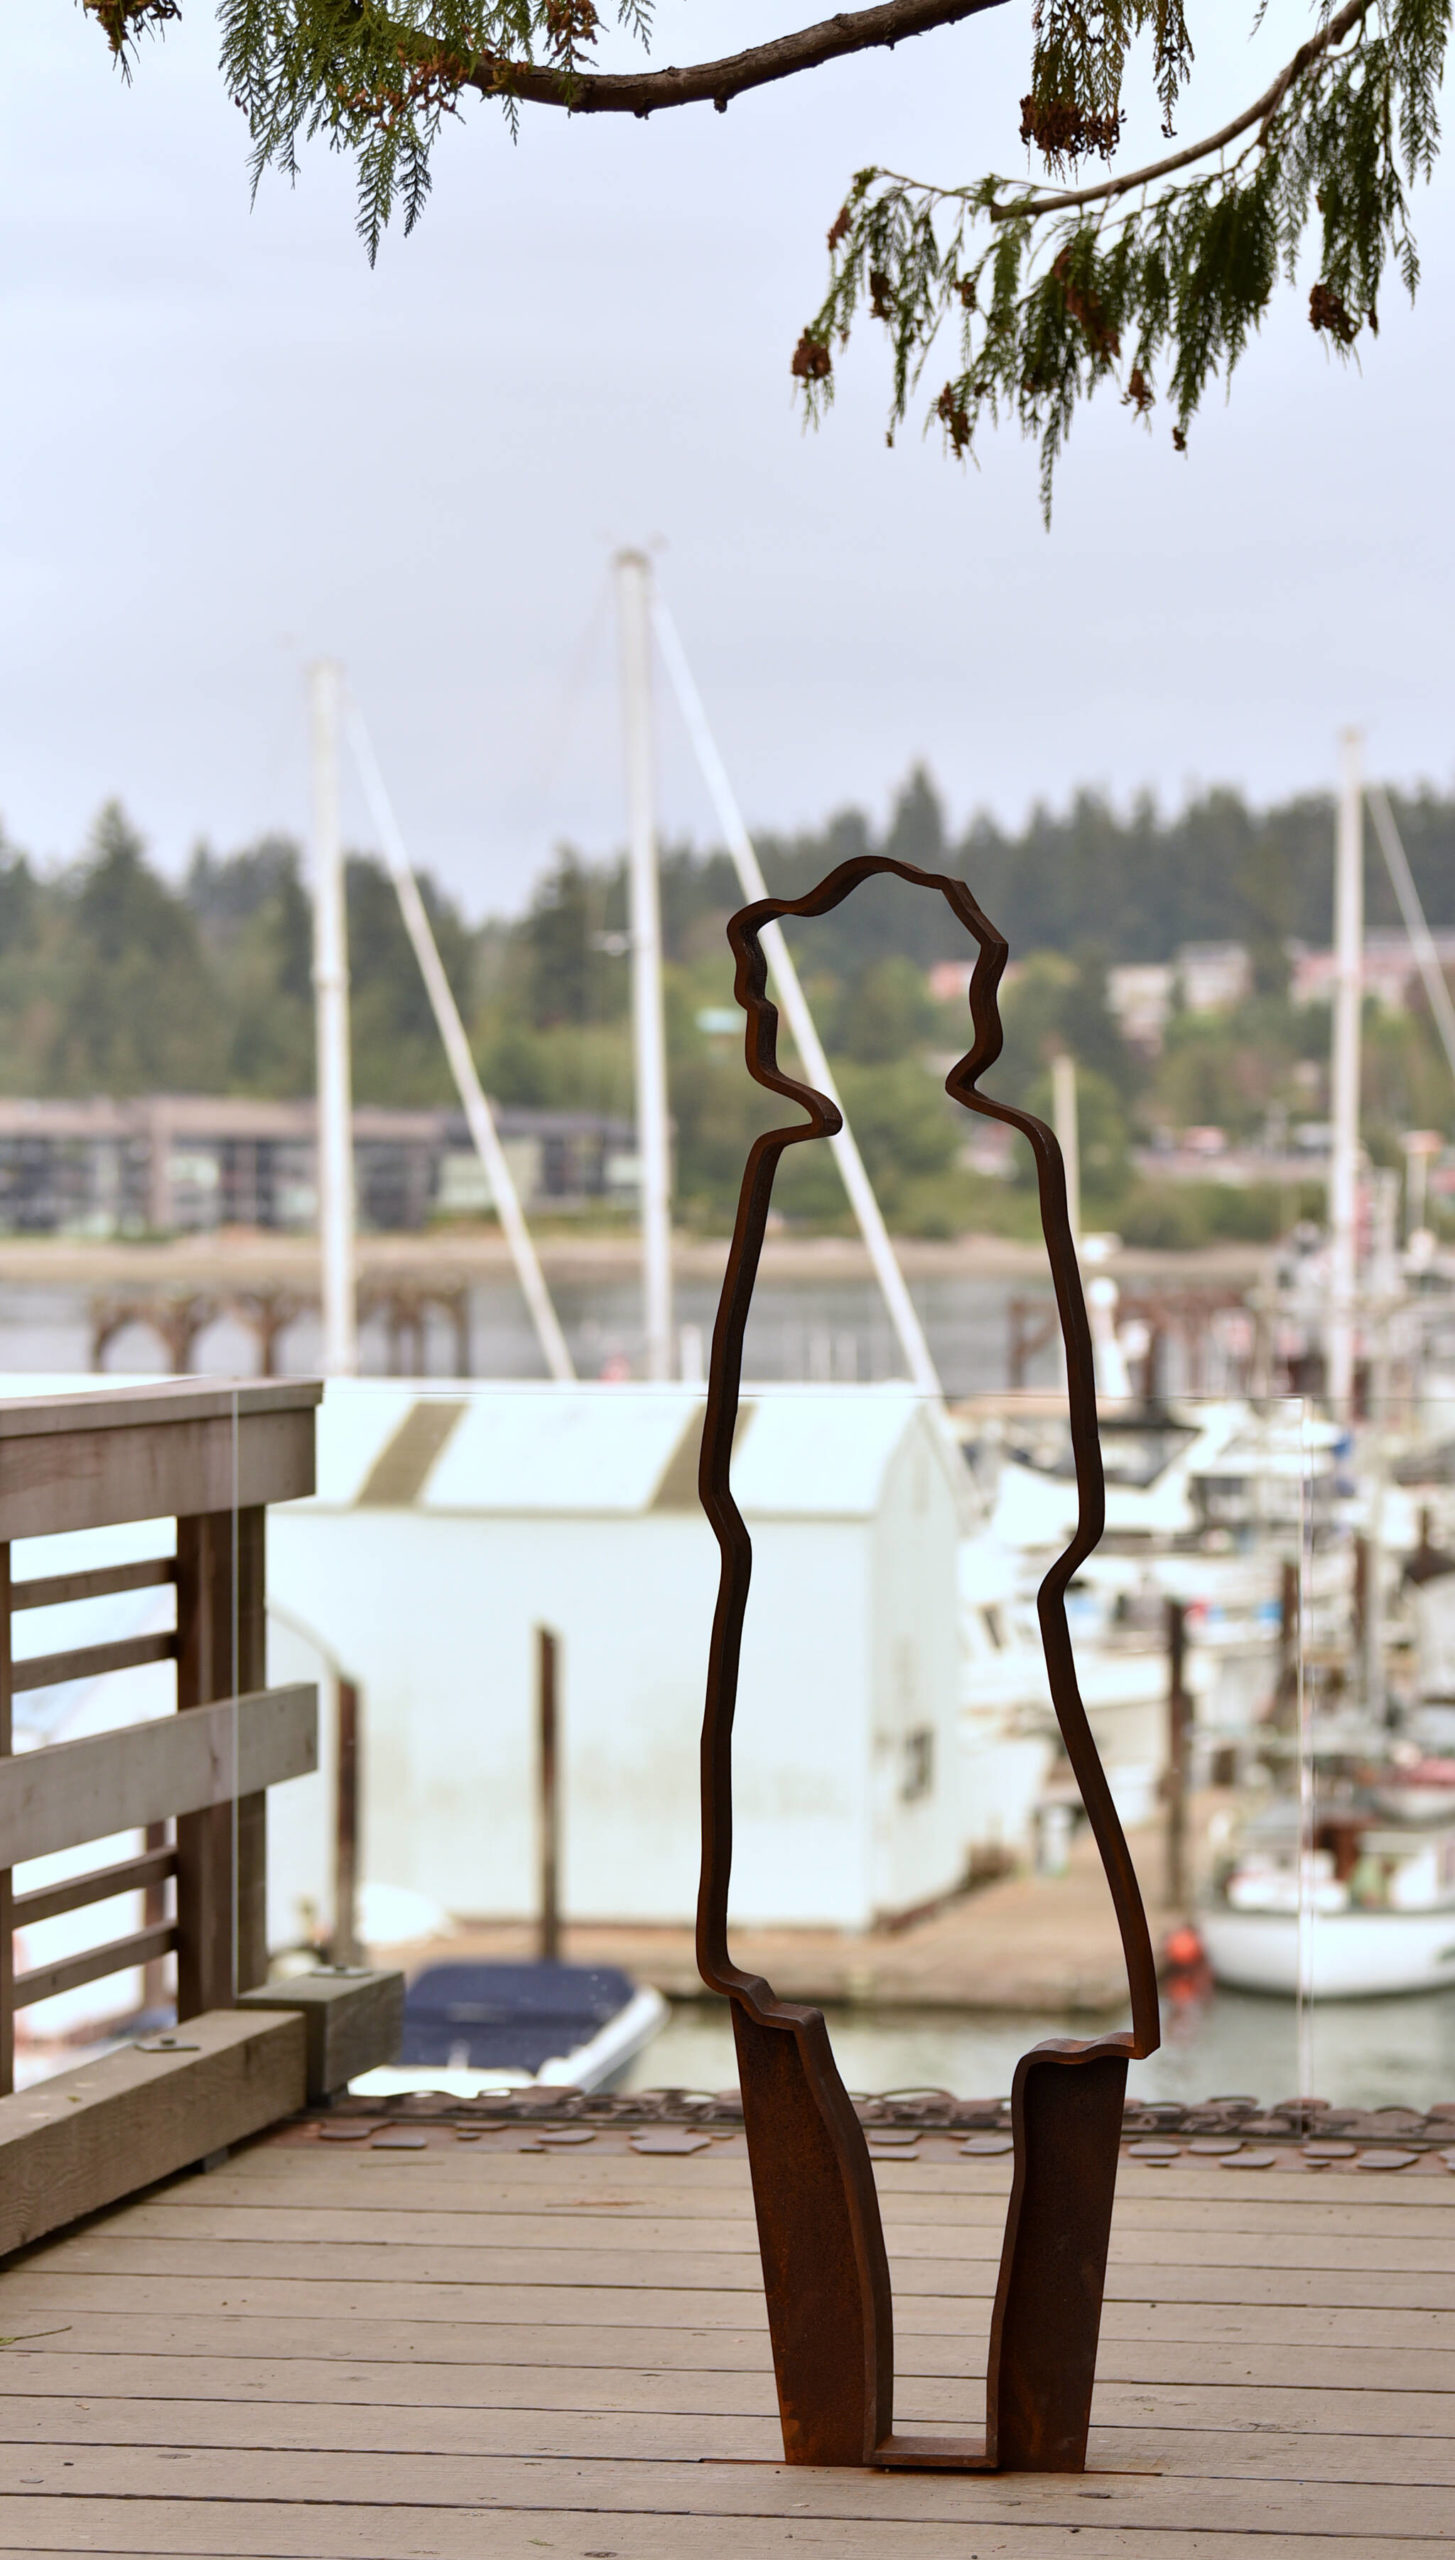 A ghost silhouette looks out at the harbor near the end of the Departure Deck.